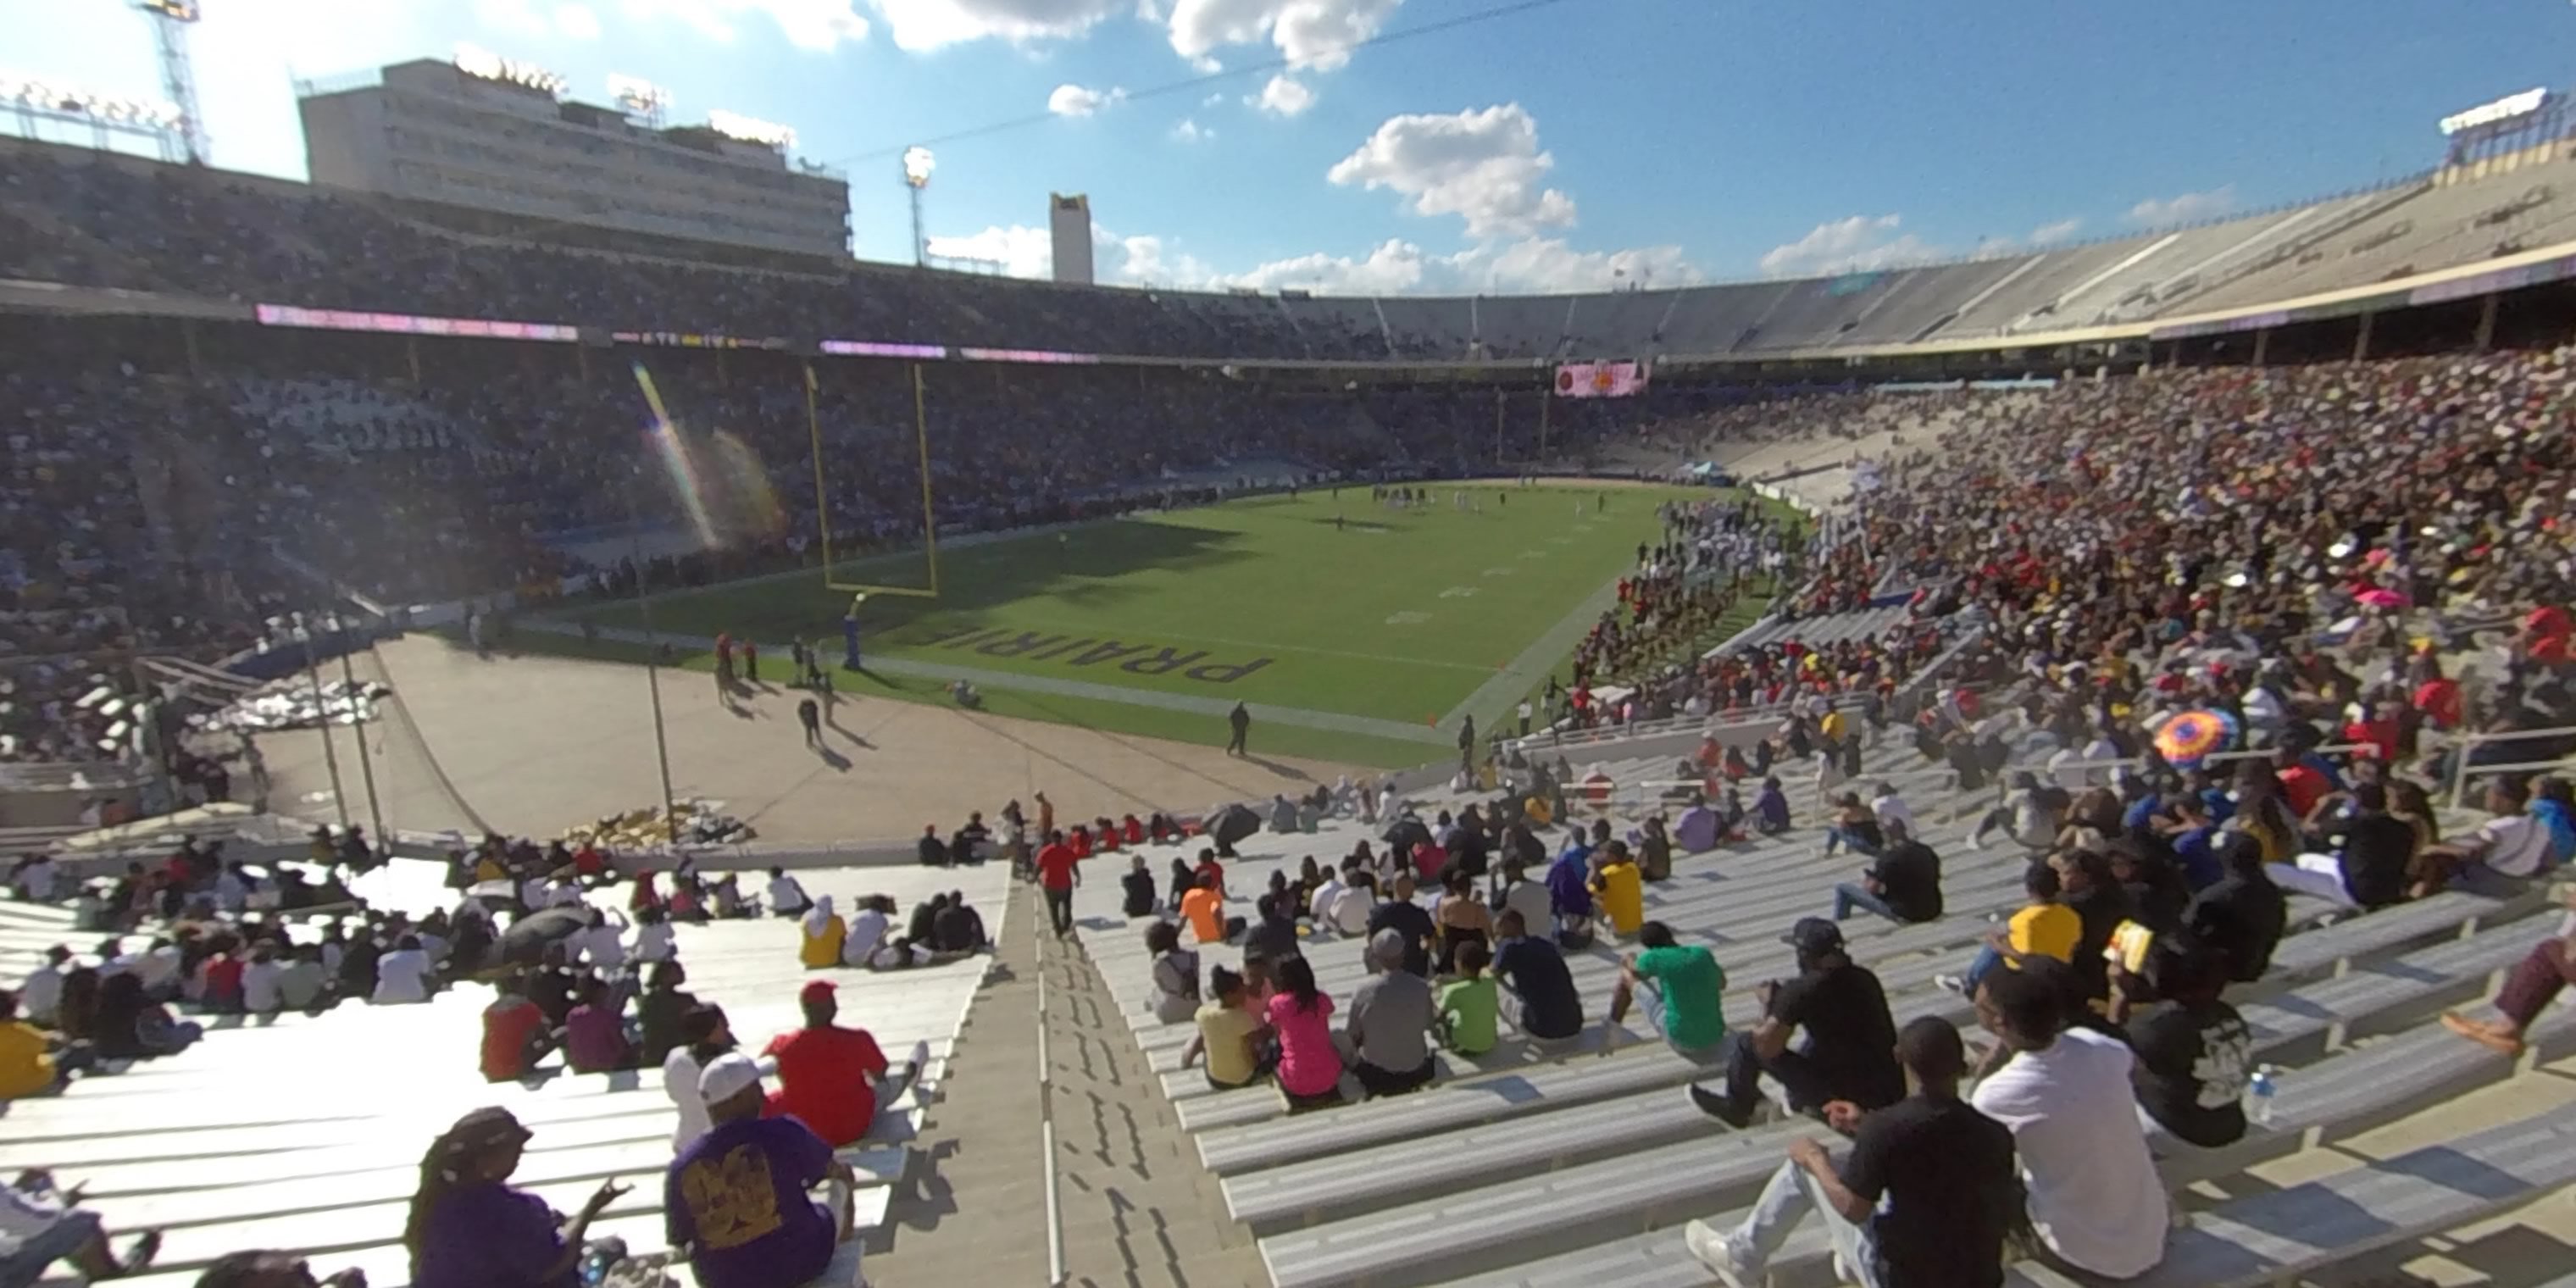 section 30 panoramic seat view  - cotton bowl